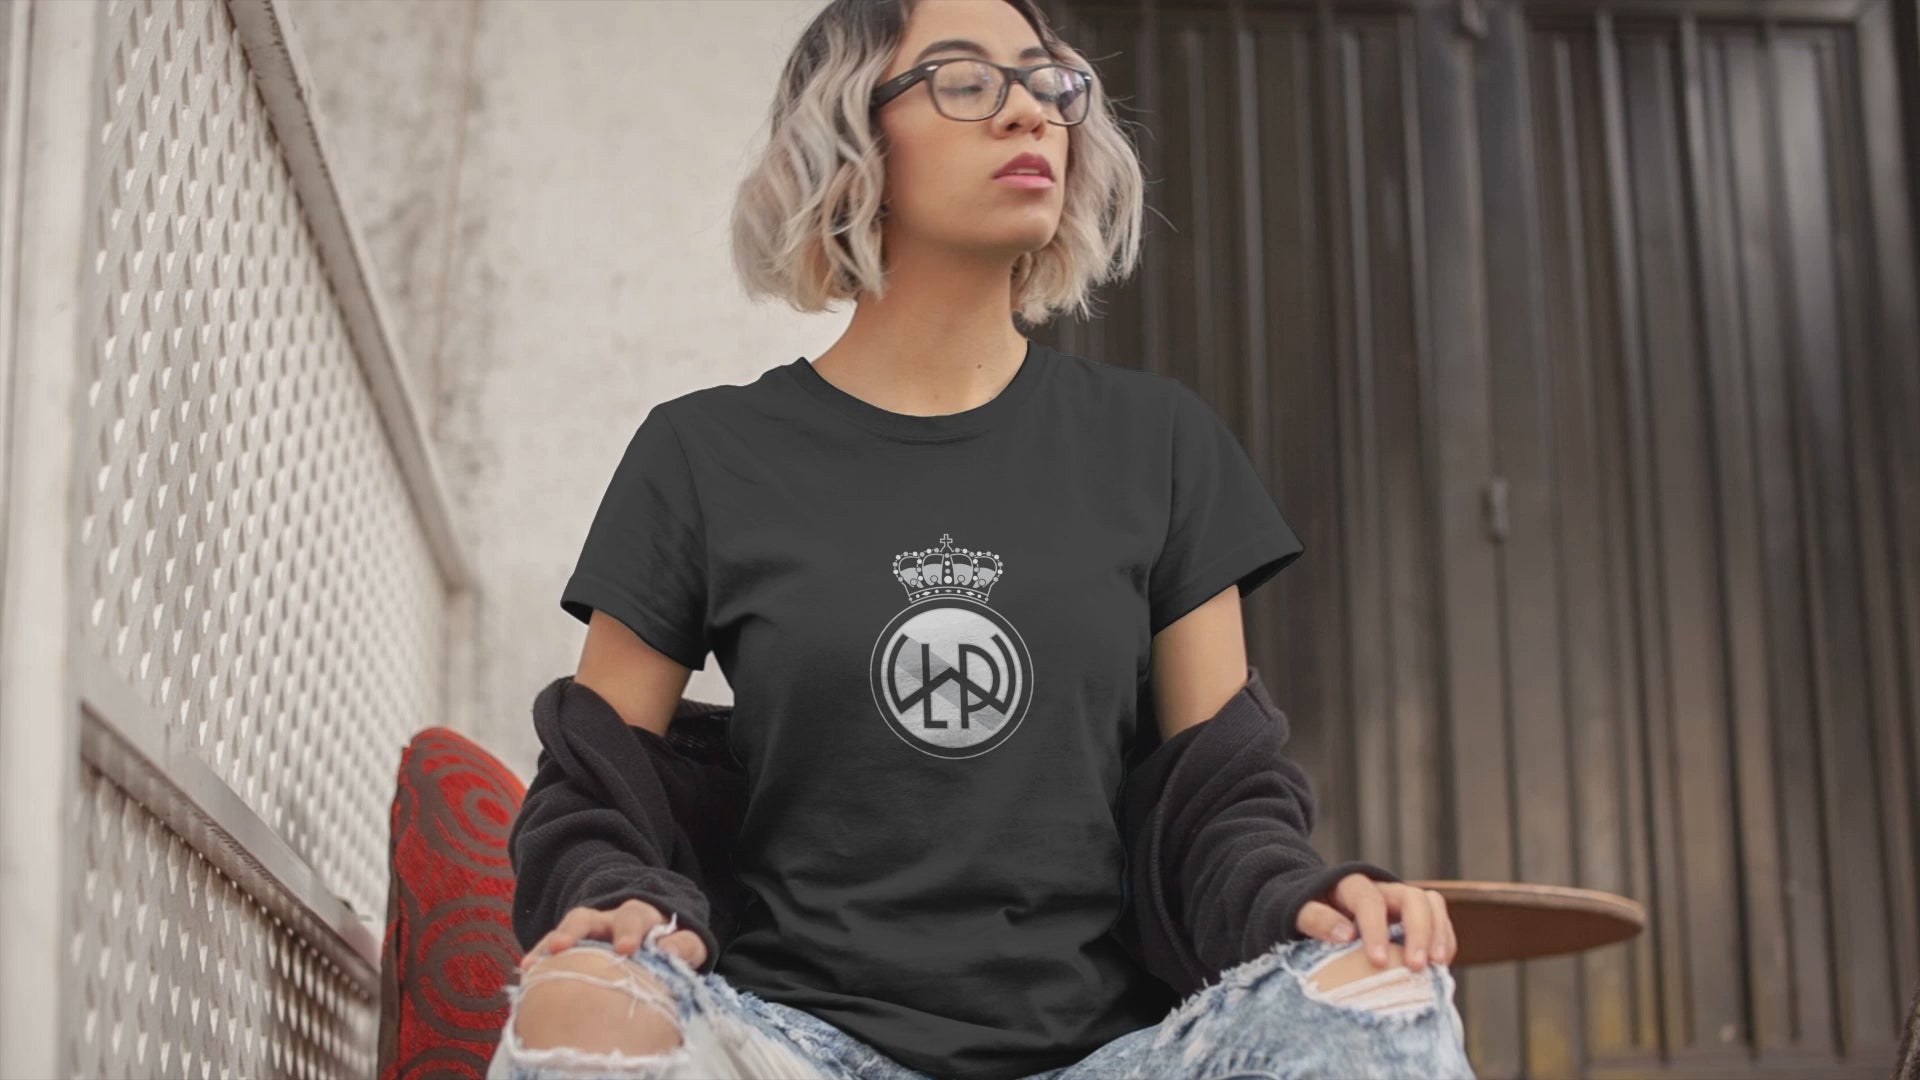 Load video: A t-shirt video featuring an edgy woman with blue framed glasses and short colored hair wearing an LWPFC dark gray short sleeved t-shirt with the club logo in black and white.